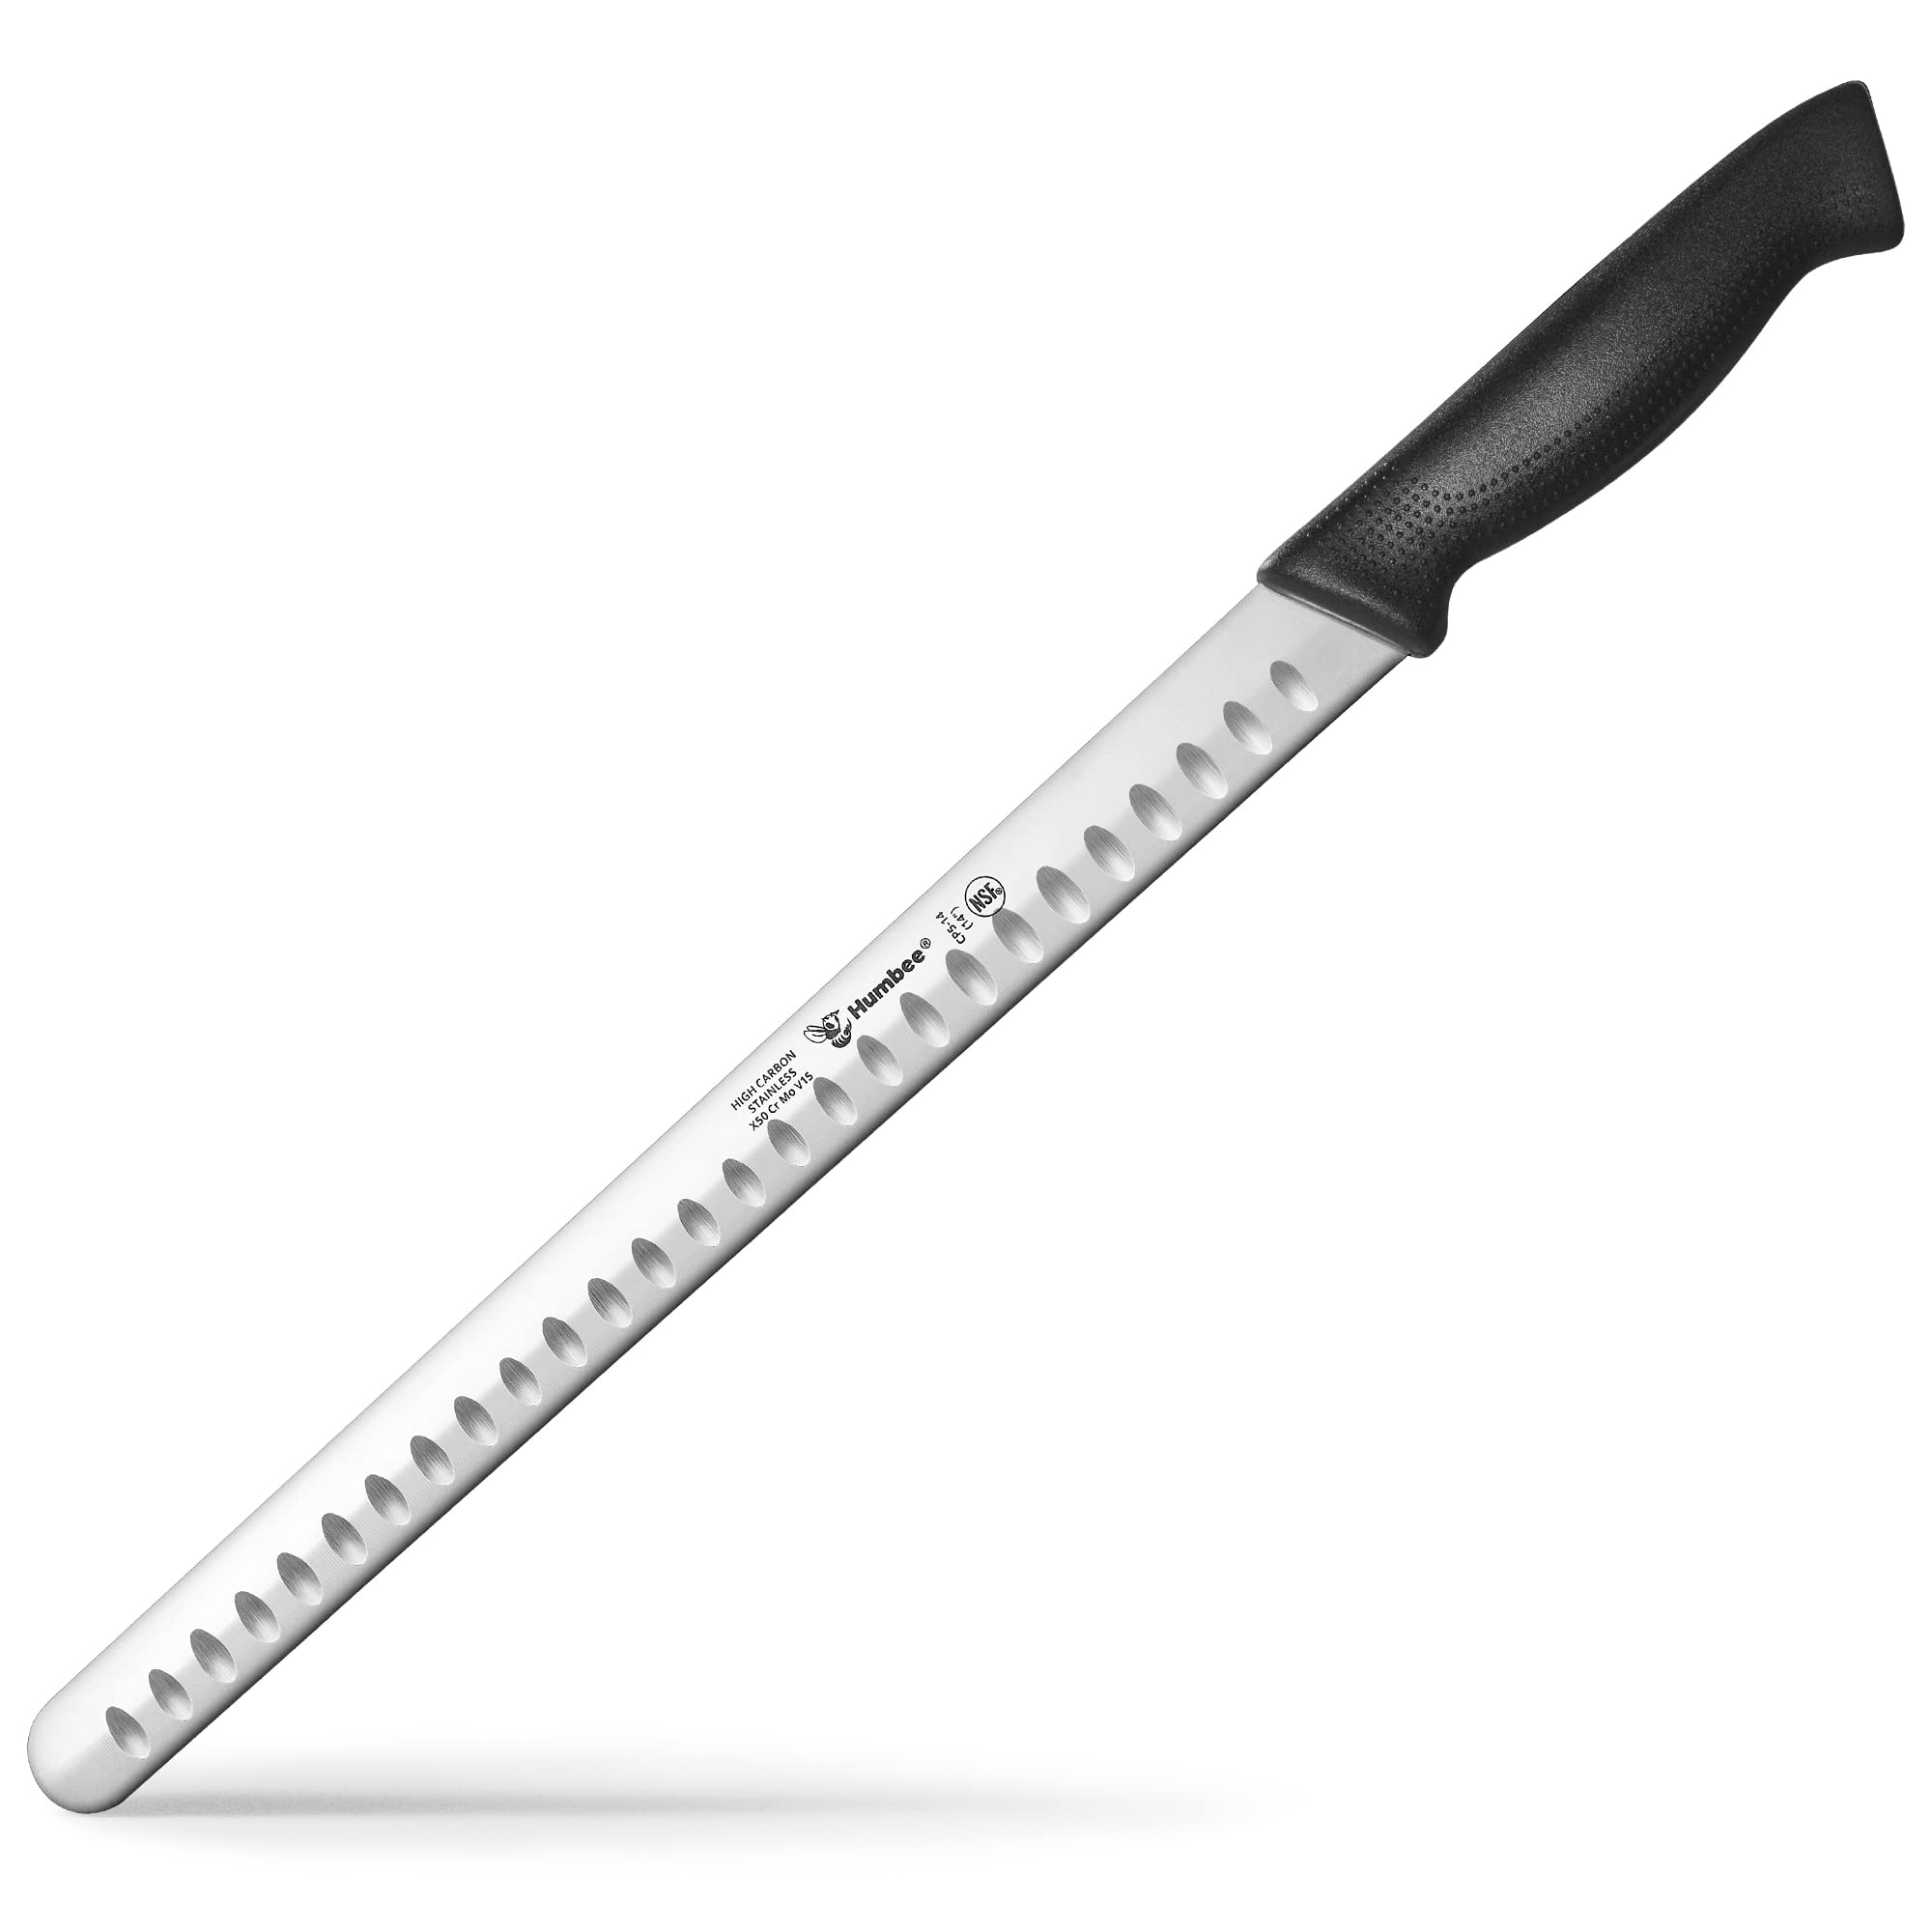 HUMBEE chef, carving Knife with granton Edge, cusine Pro chef, carving Knife 14 Inches, NSF certified